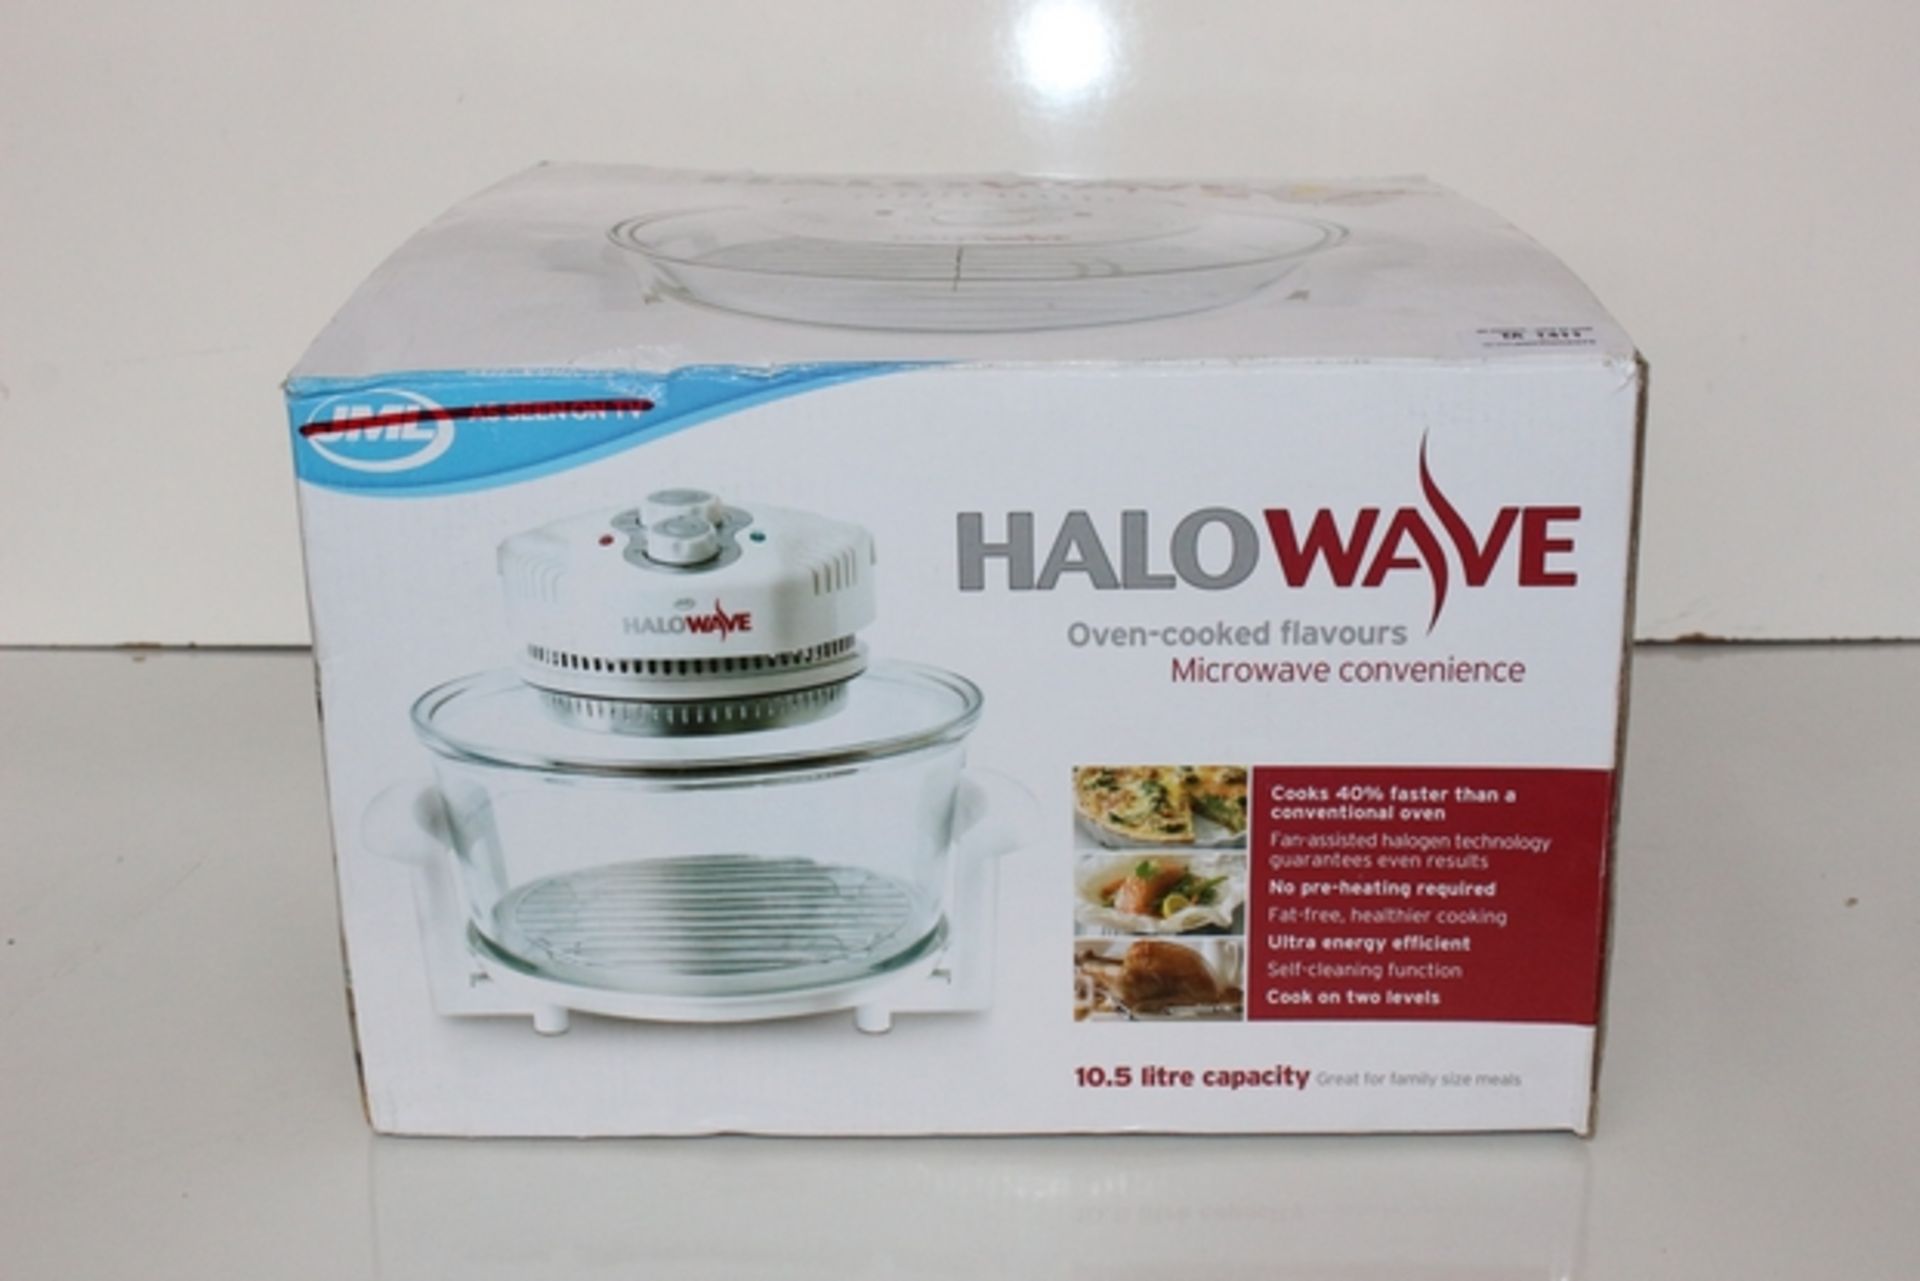 1X LOT TO CONTAIN 2 BOXED HALOWAVE HALOGEN OVENS (AC-LMJ)